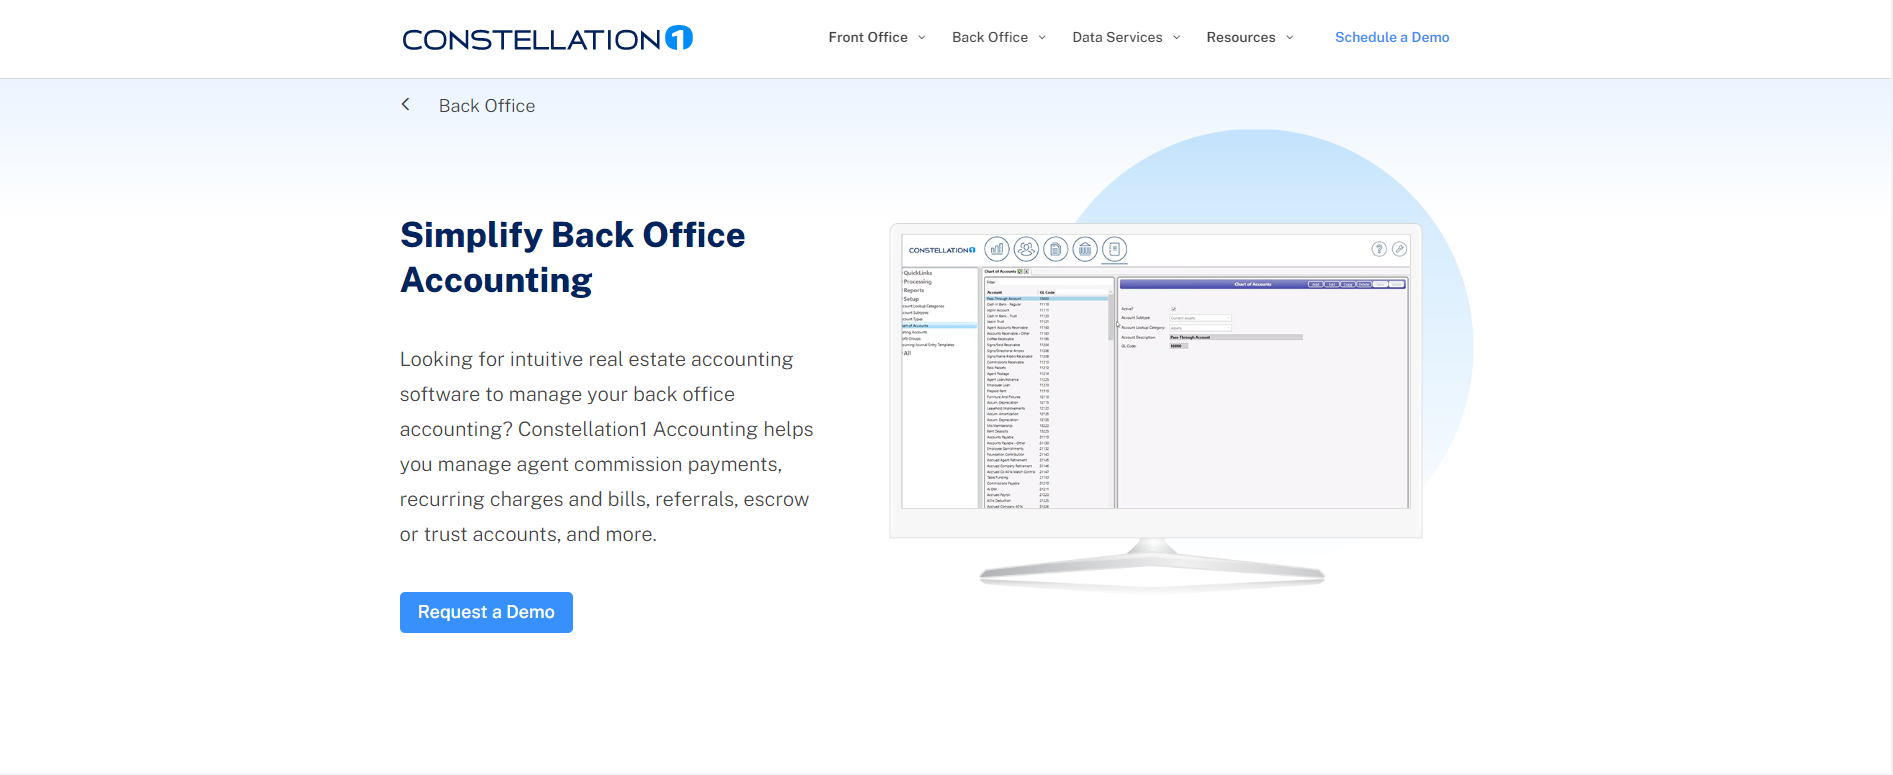 Constellation1 Accounting Landing Page